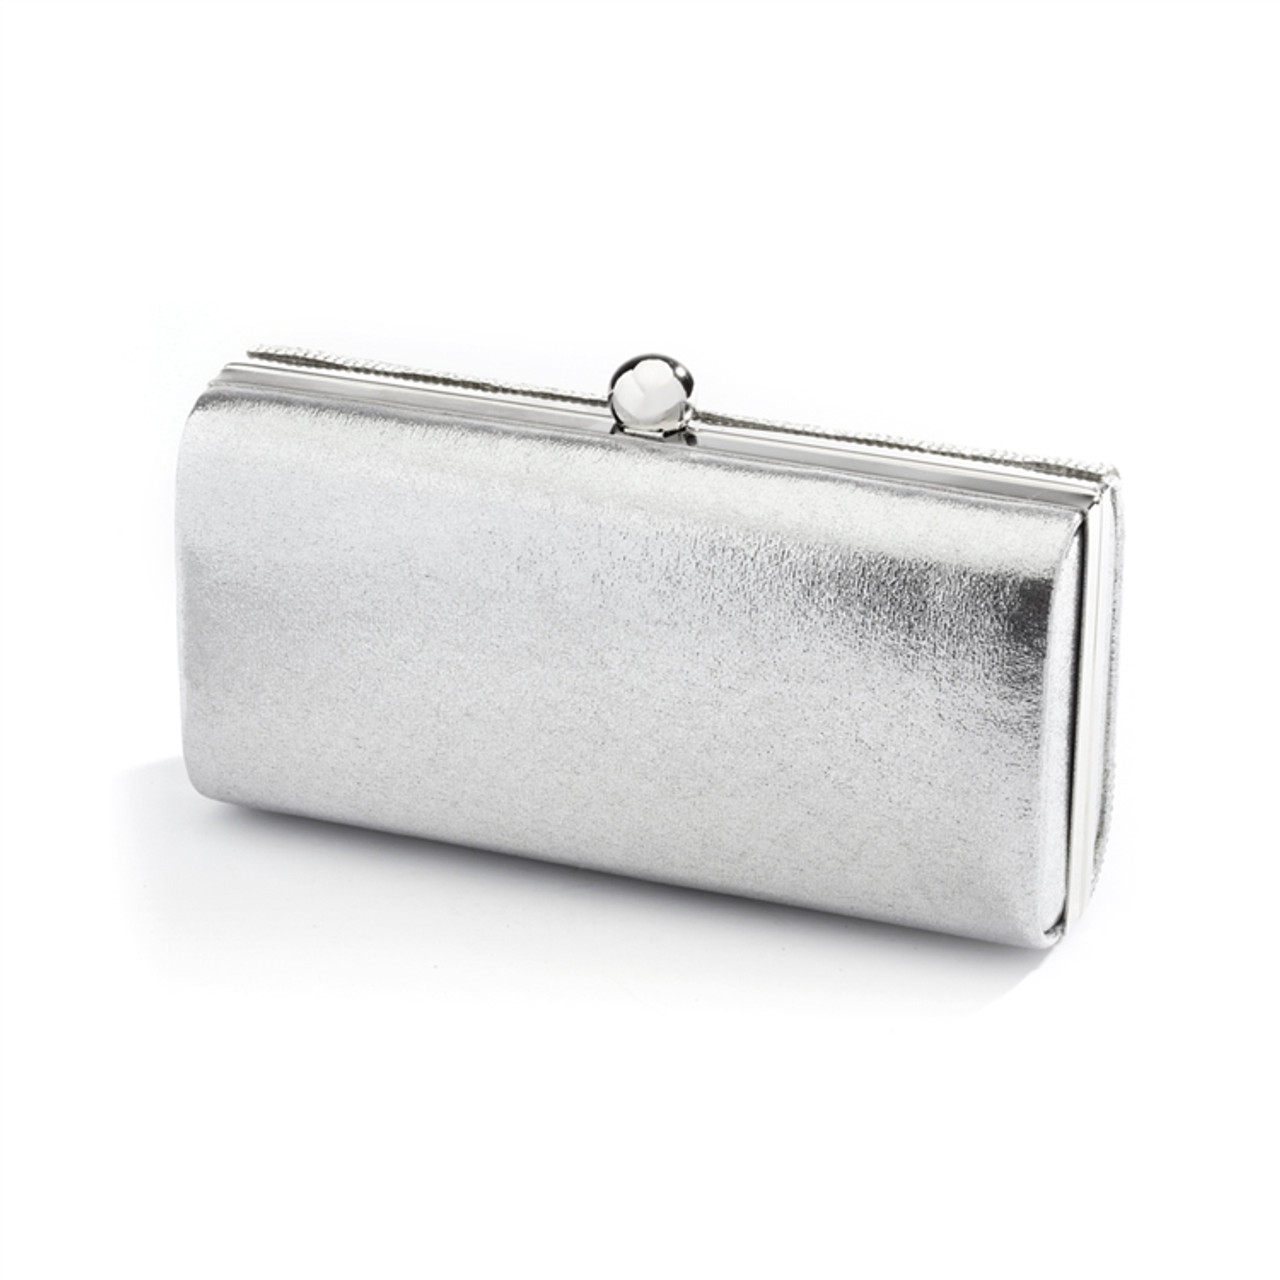 Micropave Crystal Bridal Clutch Evening Bag in Silver 4390EB-CR-S